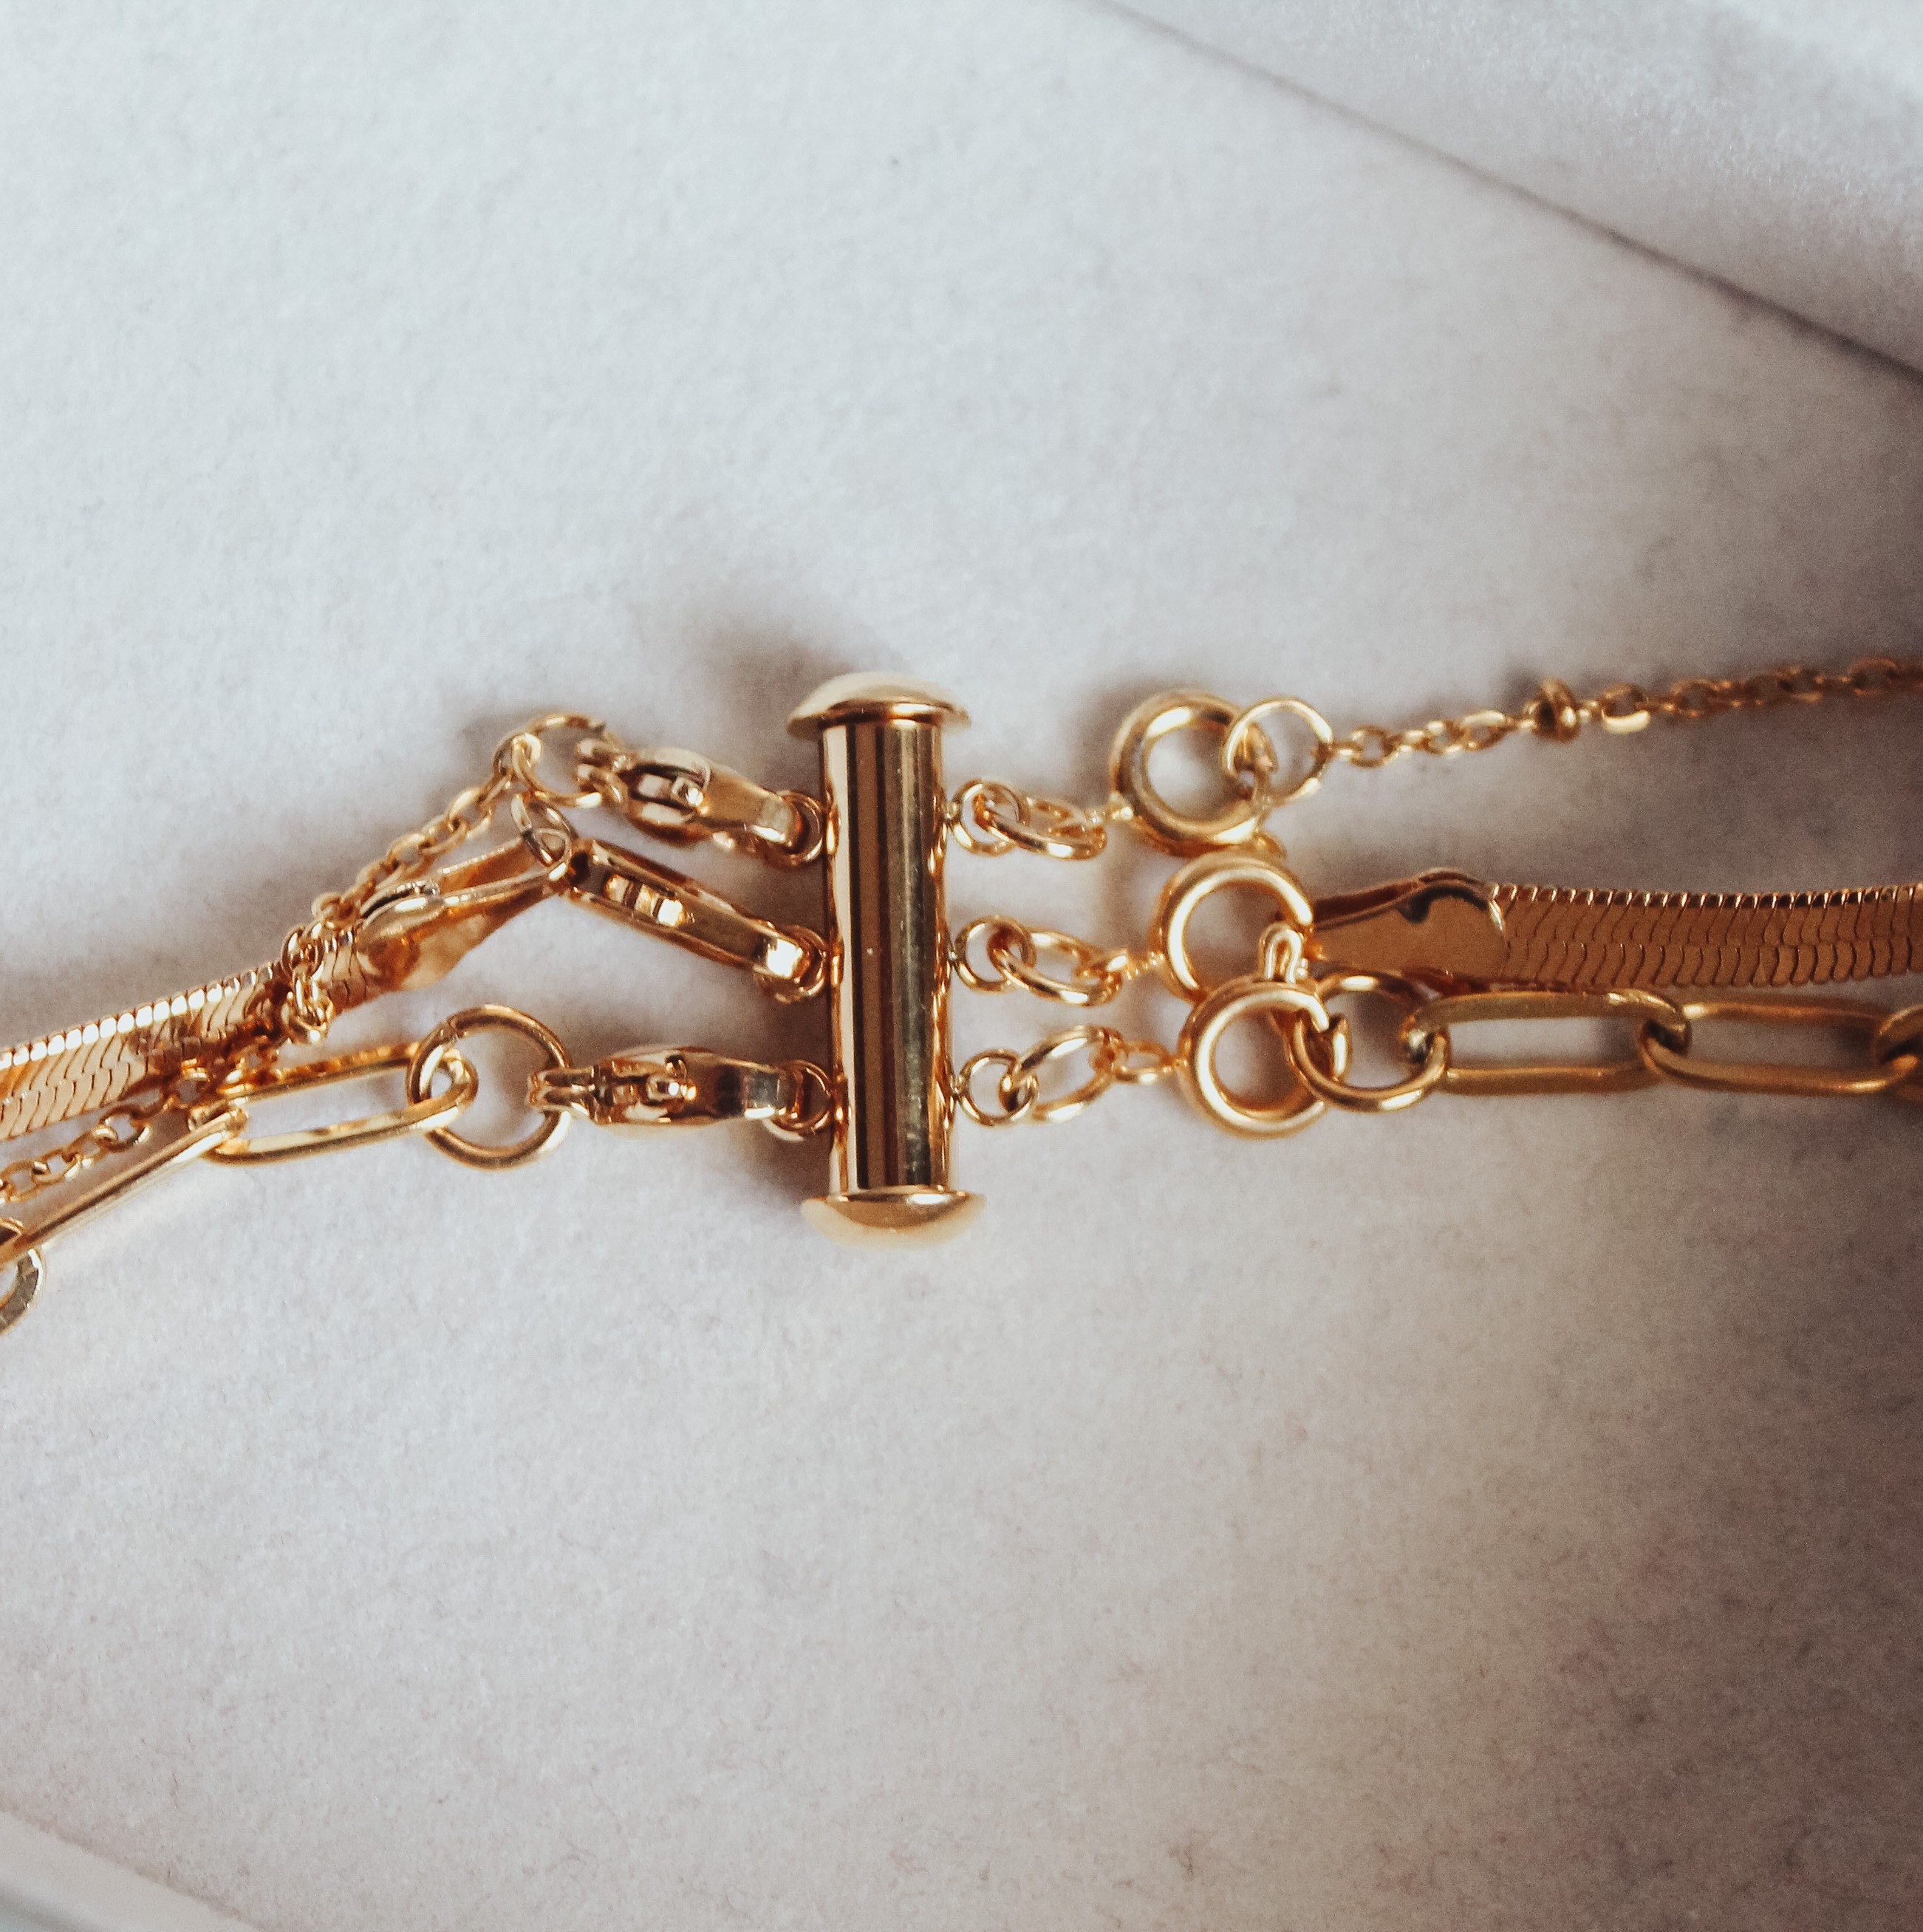 Accessory Collection - Rose Gold Triple Necklace Layering Clasp